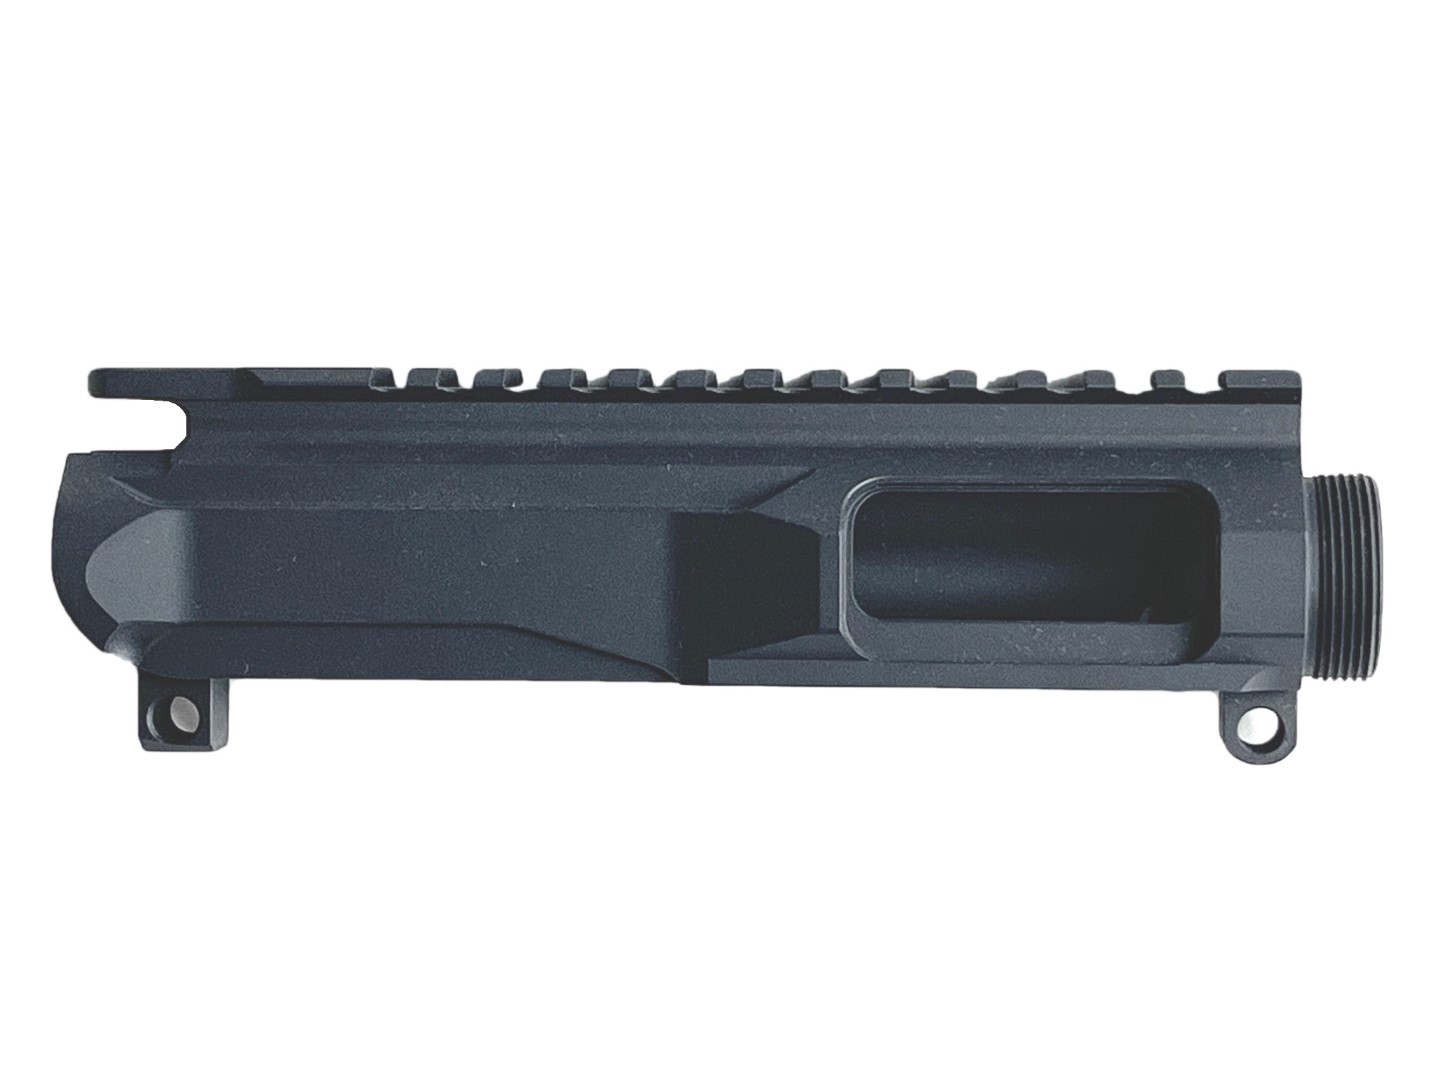 Stripped Upper Receiver For Pistol Calibers GRAY